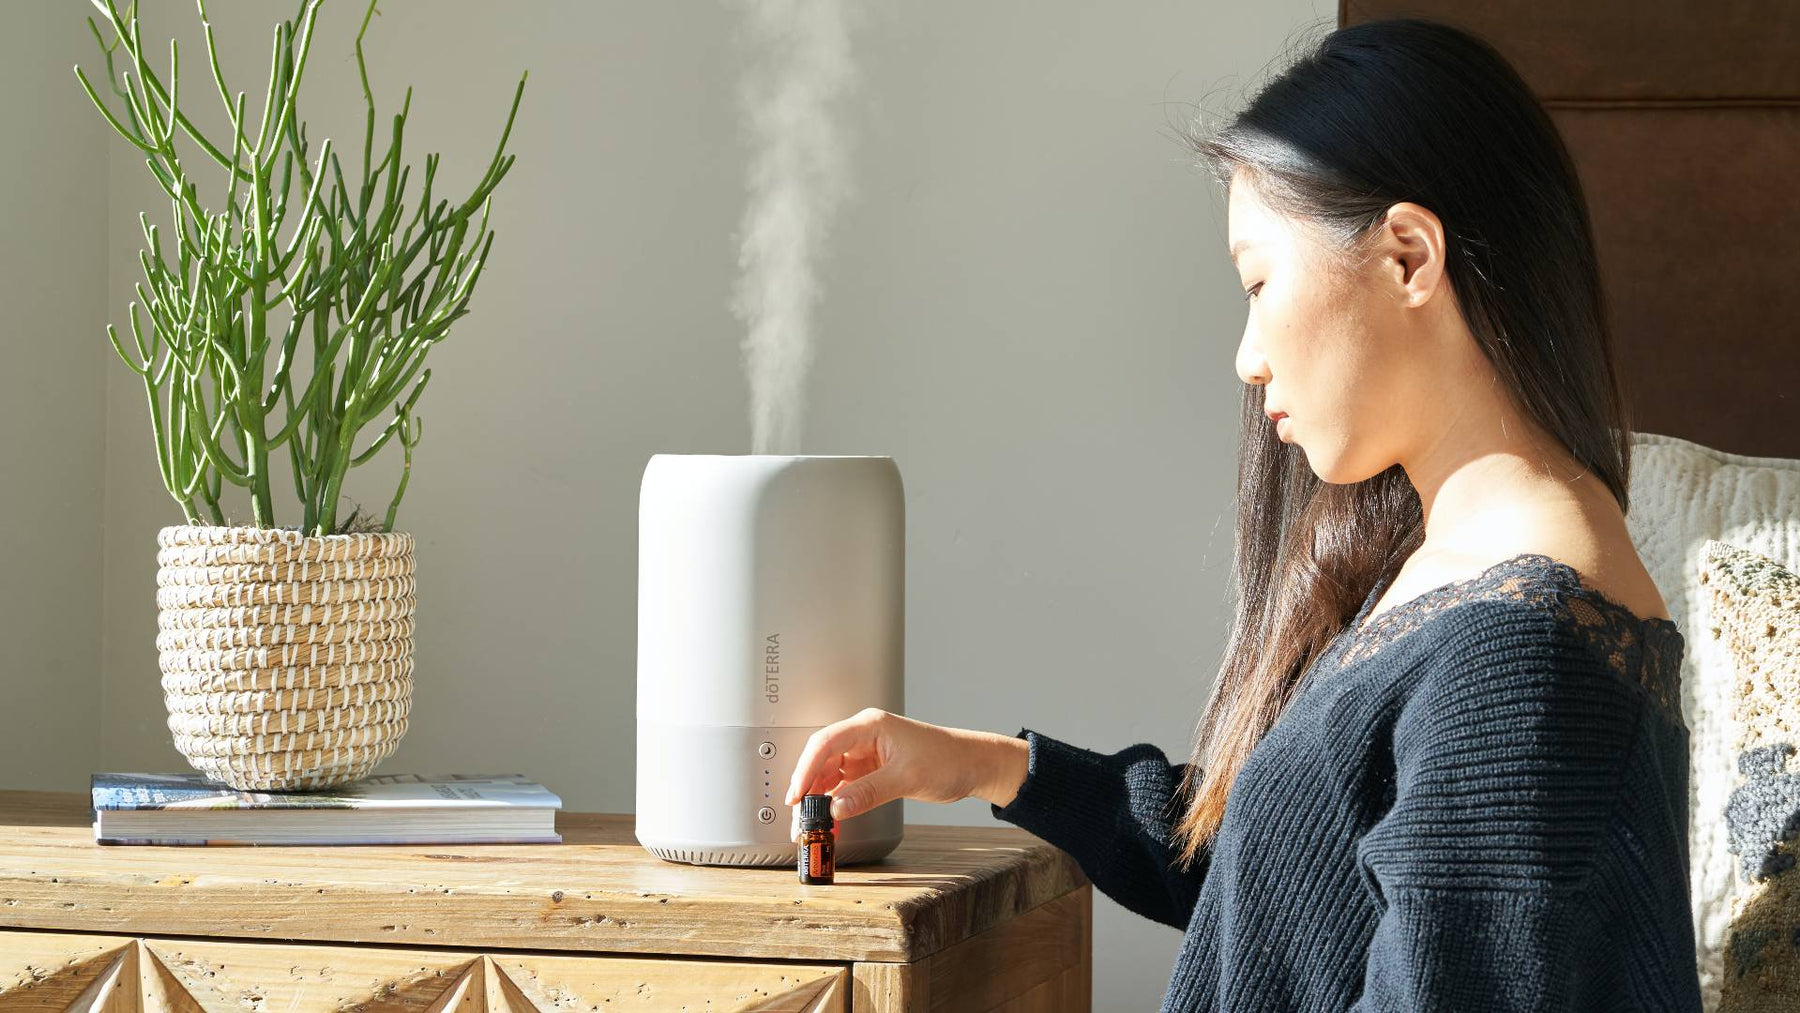 How Long Does a Humidifier Last?